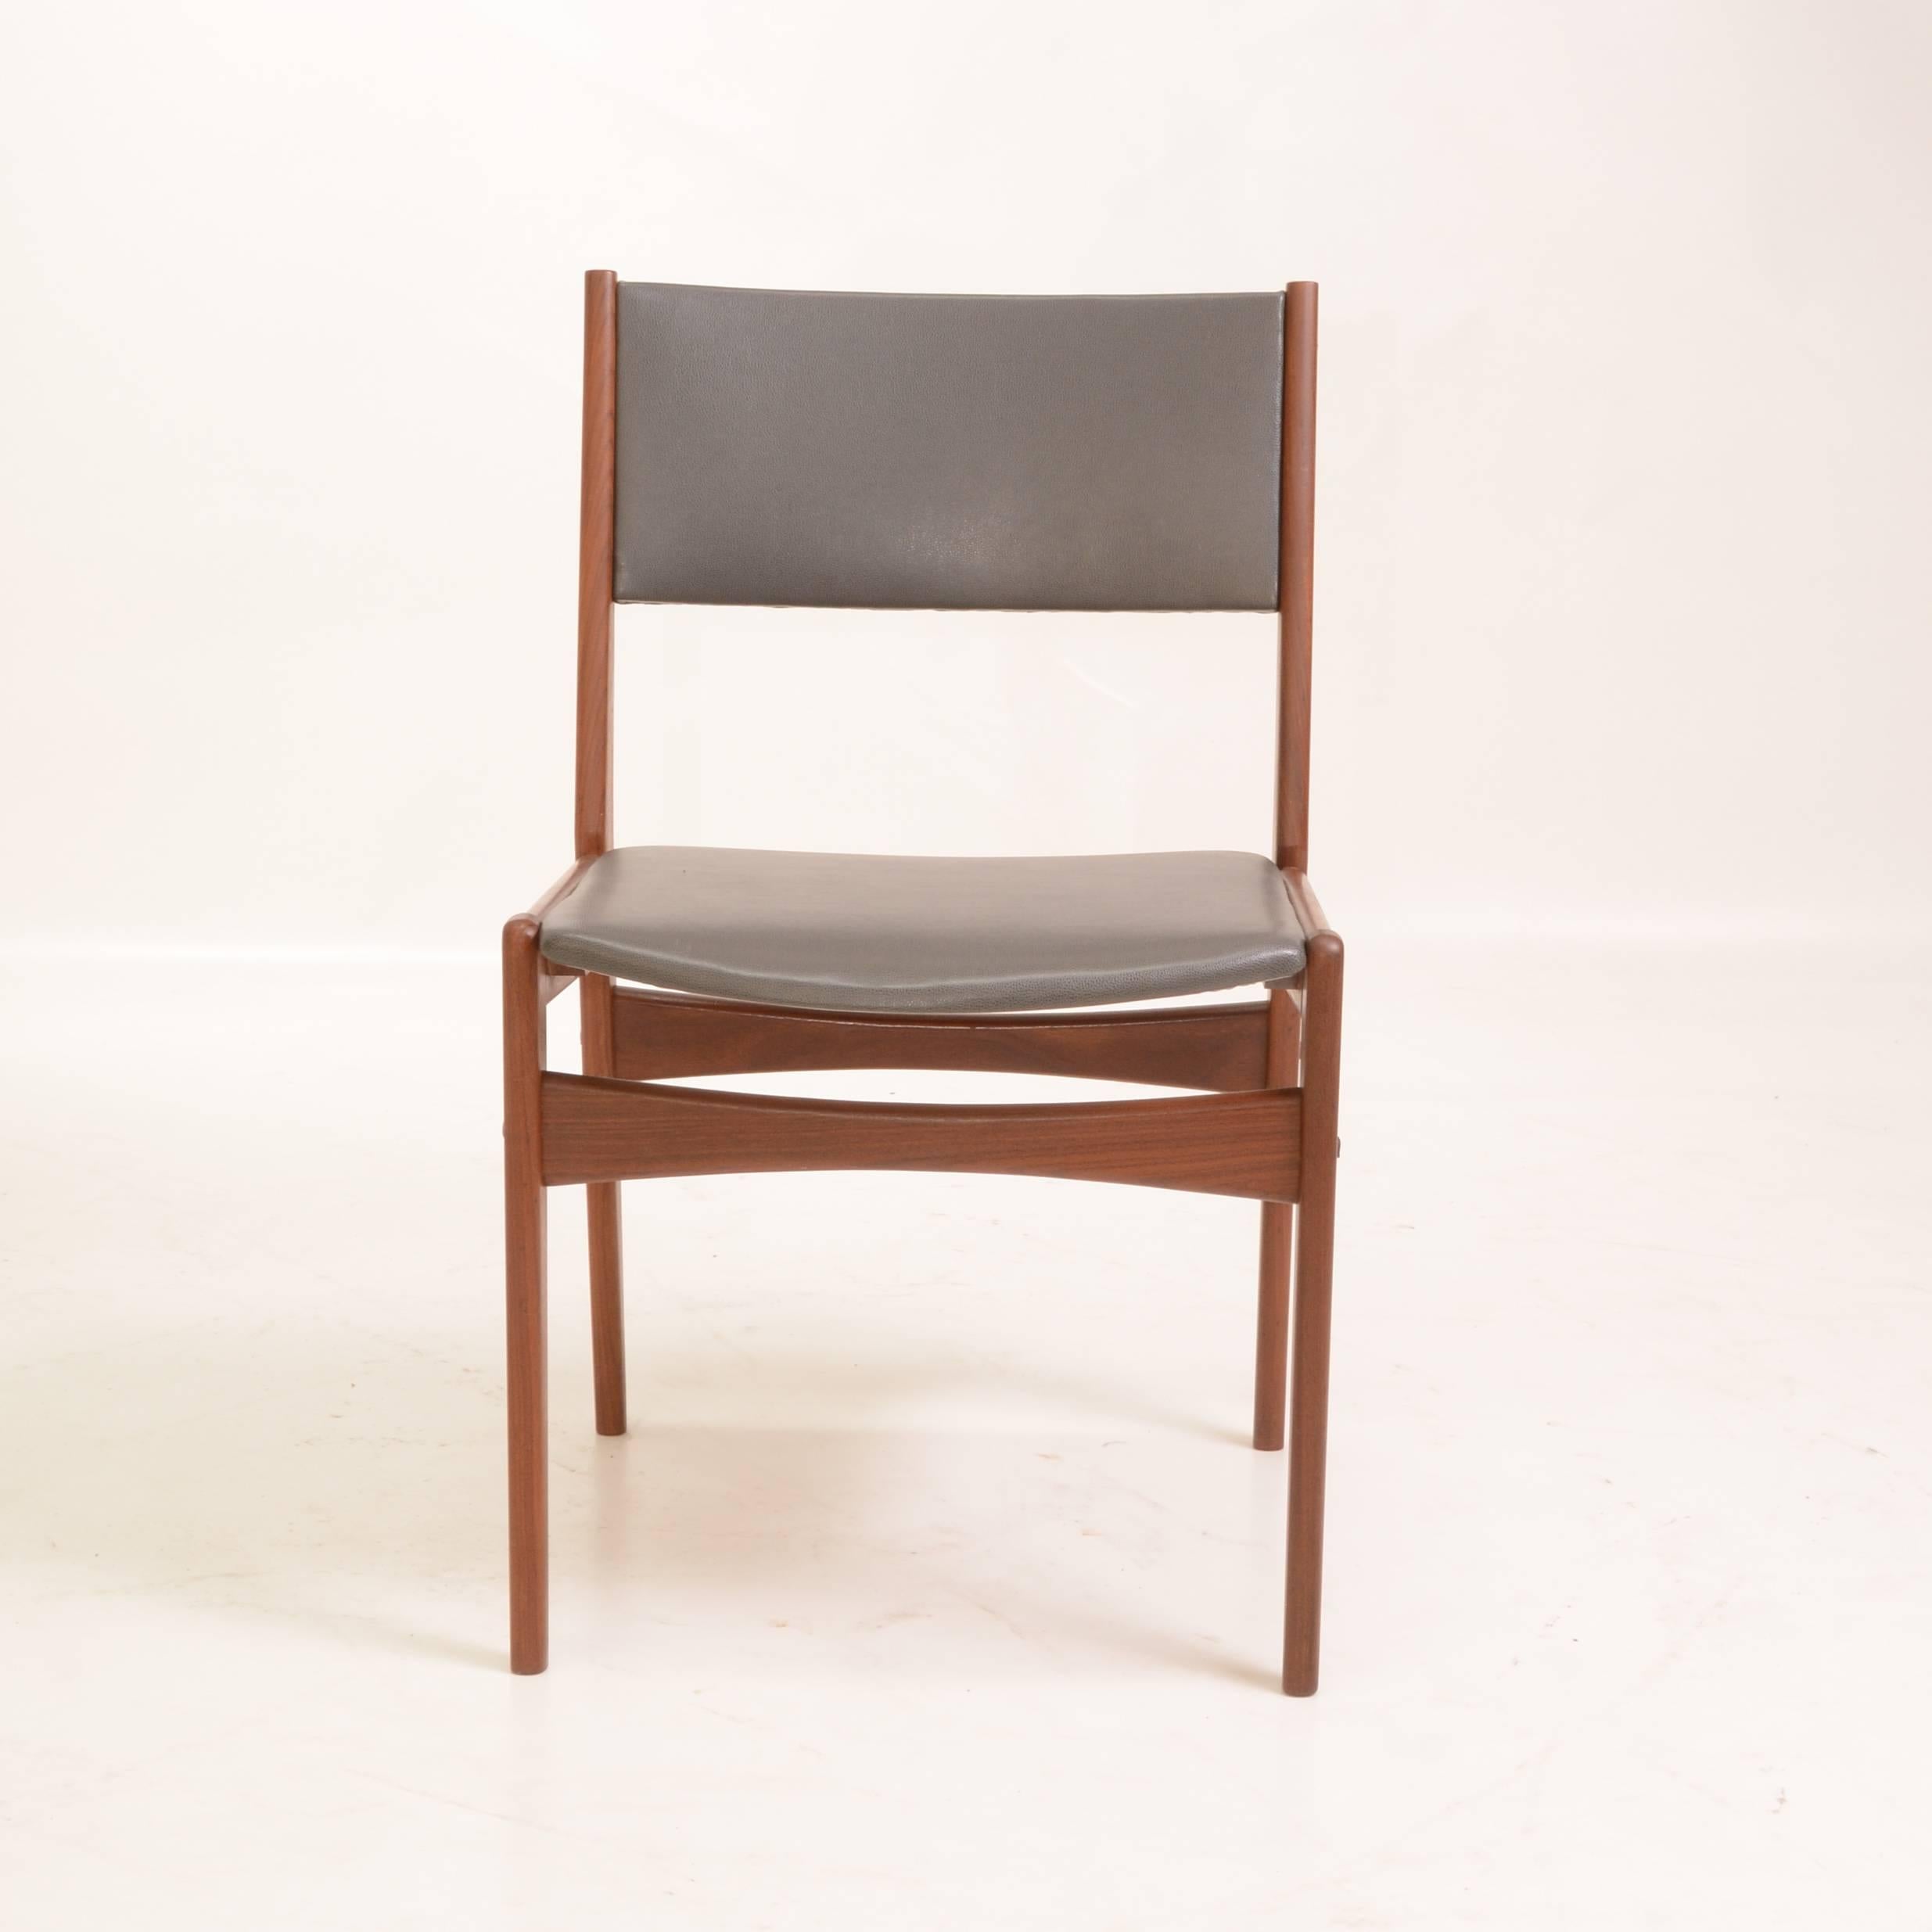 Set of 6, Danish modern dining chairs by Hans Olsen for Frem Rojle are newly restored teak with gray vinyl upholstered seats and backrests.